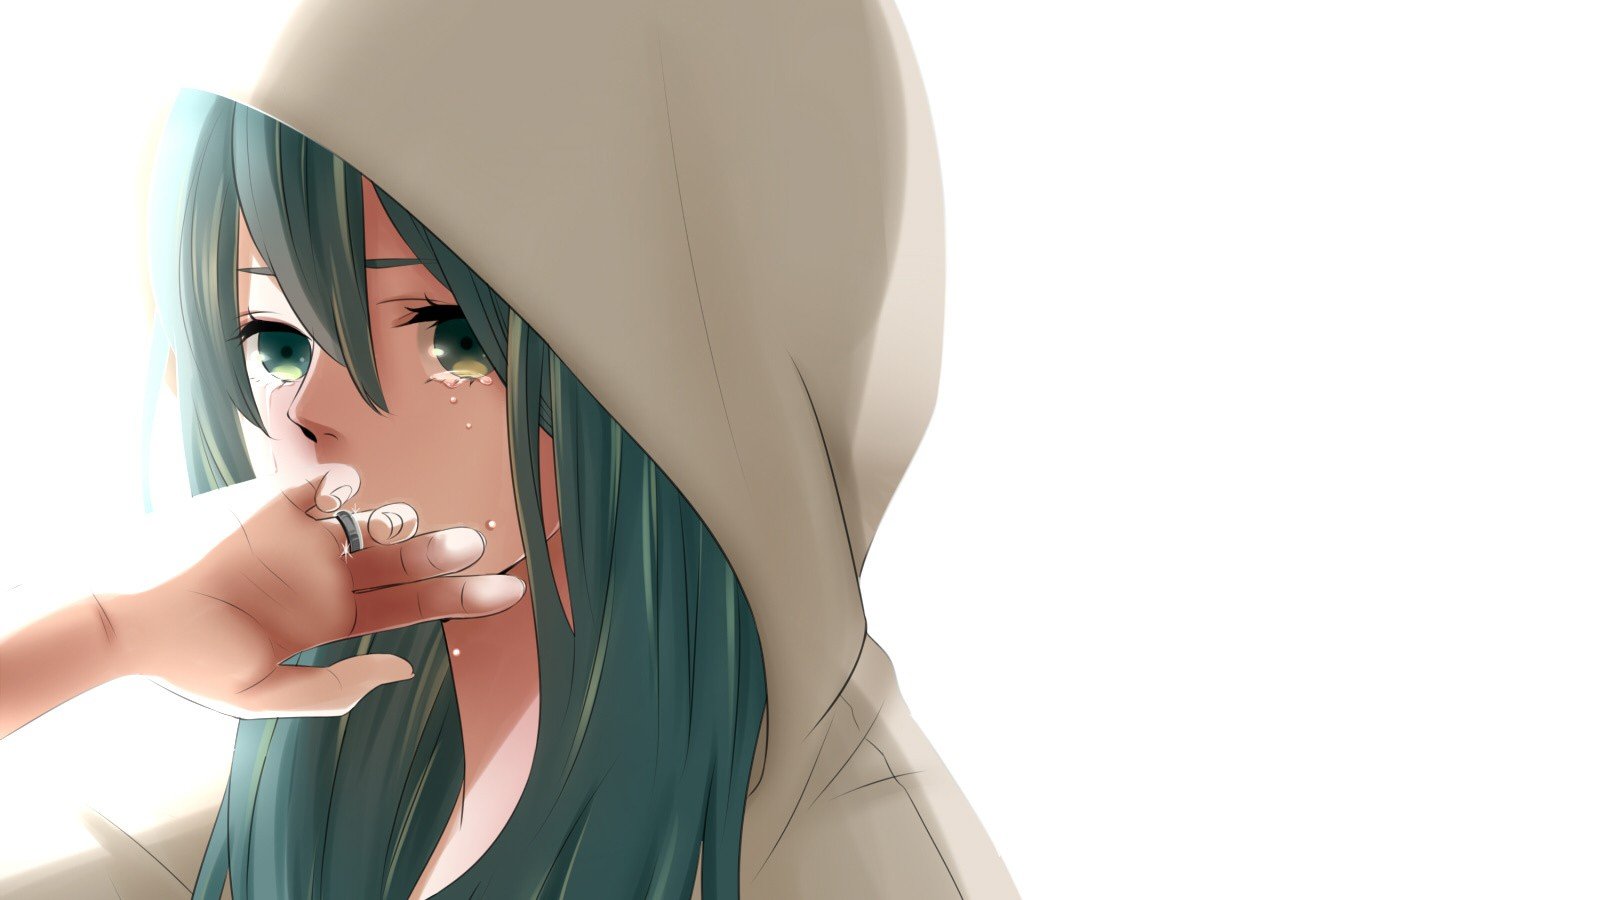 Crying anime girl background wallpapers